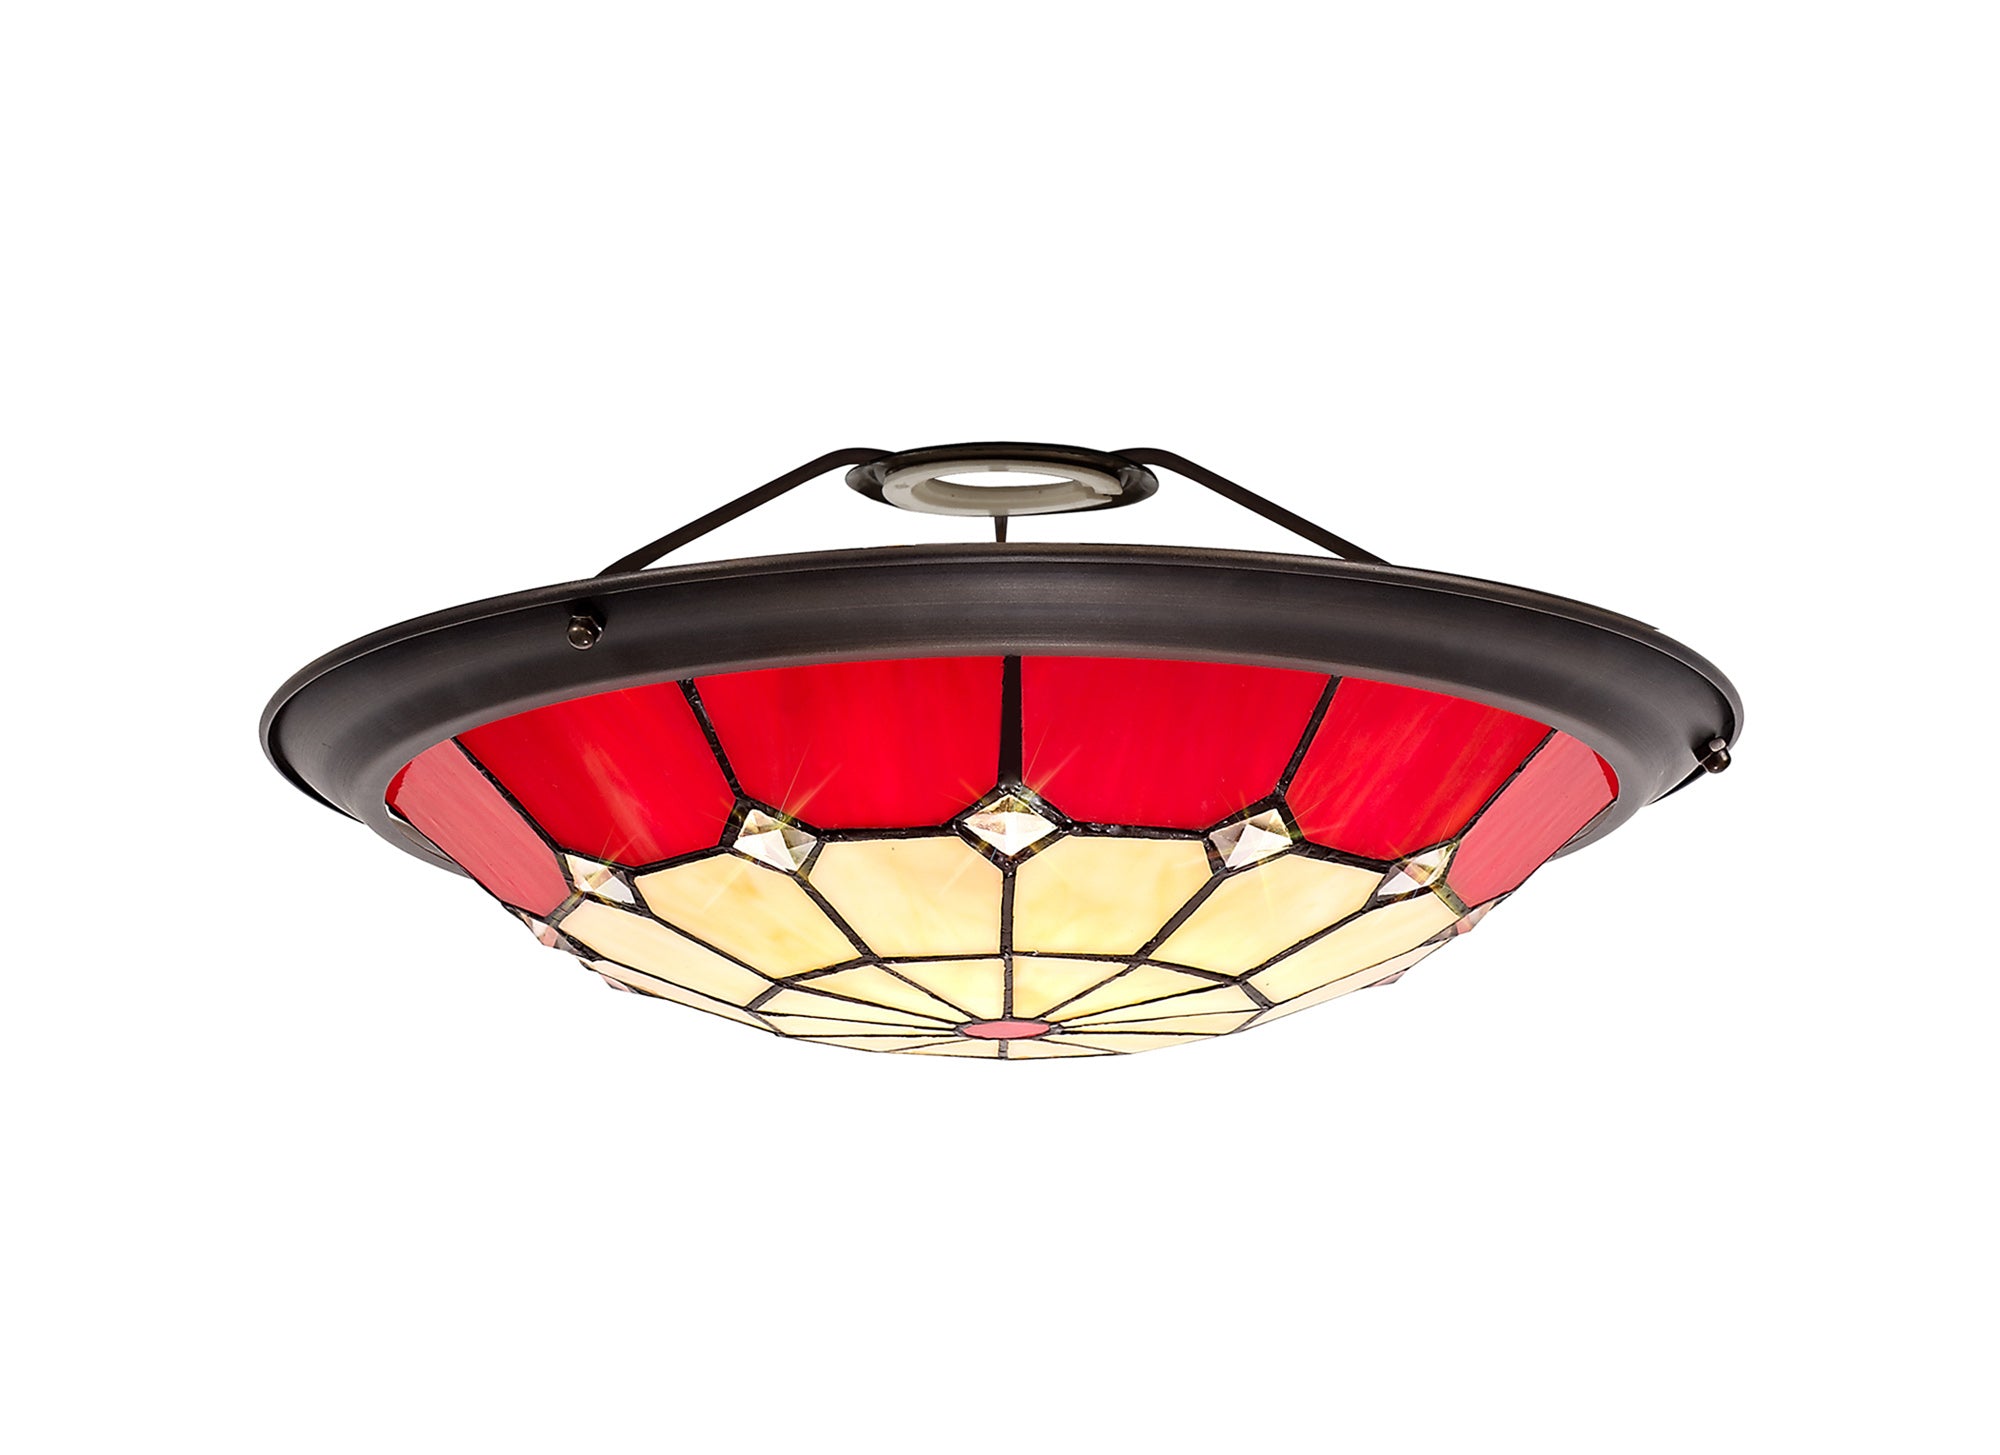 Austiffany, Tiffany 35cm Non-electric Uplighter Shade, Crealm/Red/Clear Crystal Centre/Aged Antique Brass Trim